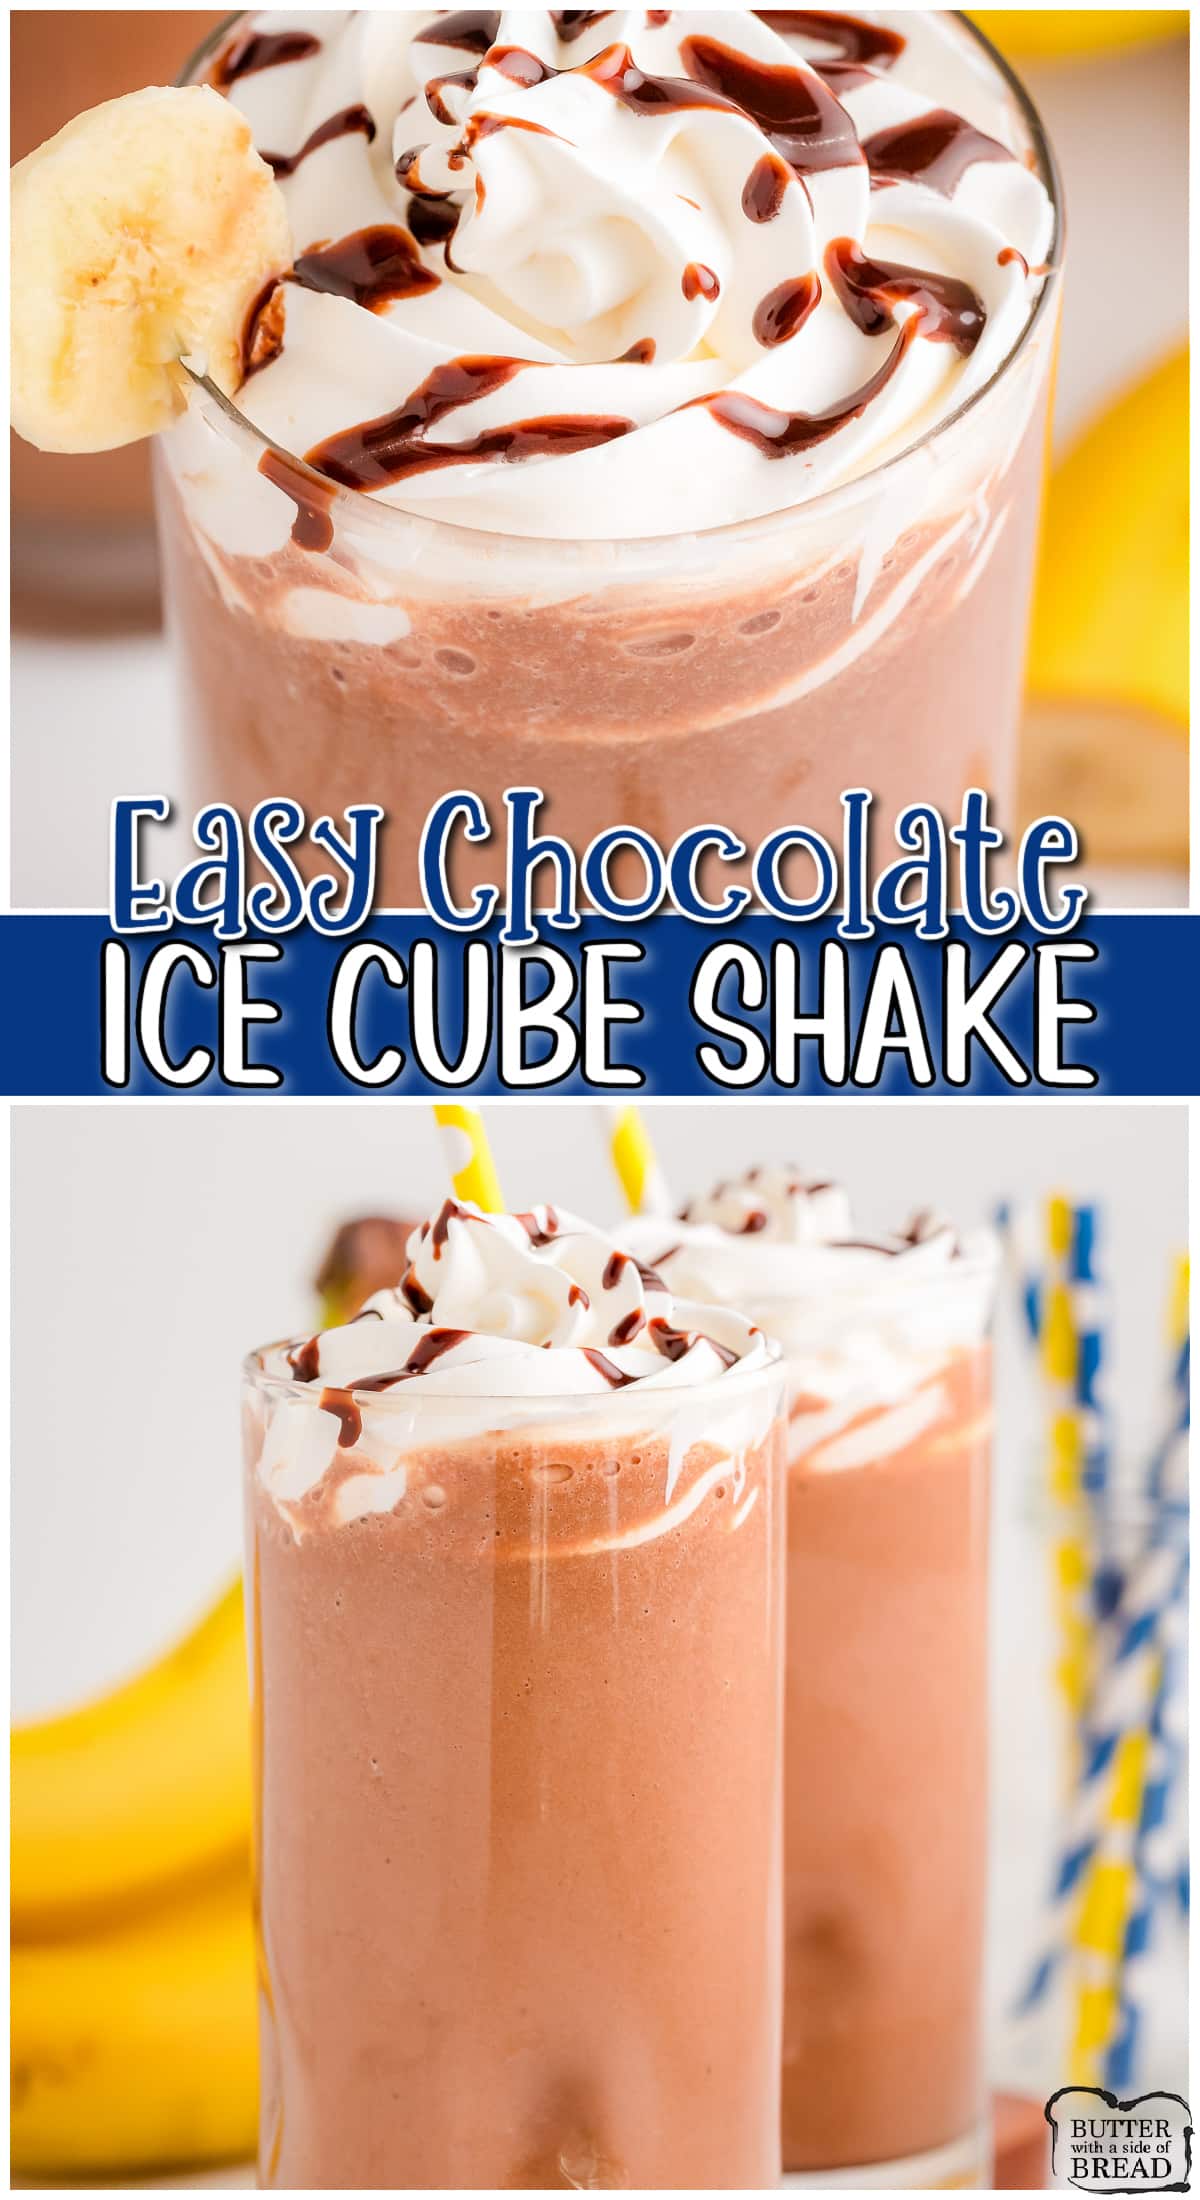 Skinny Chocolate Ice Cube Shake made easy with cocoa powder, a banana, milk and ice cubes! Easy, slushy delightfully chocolate shake that's low calorie & delicious!